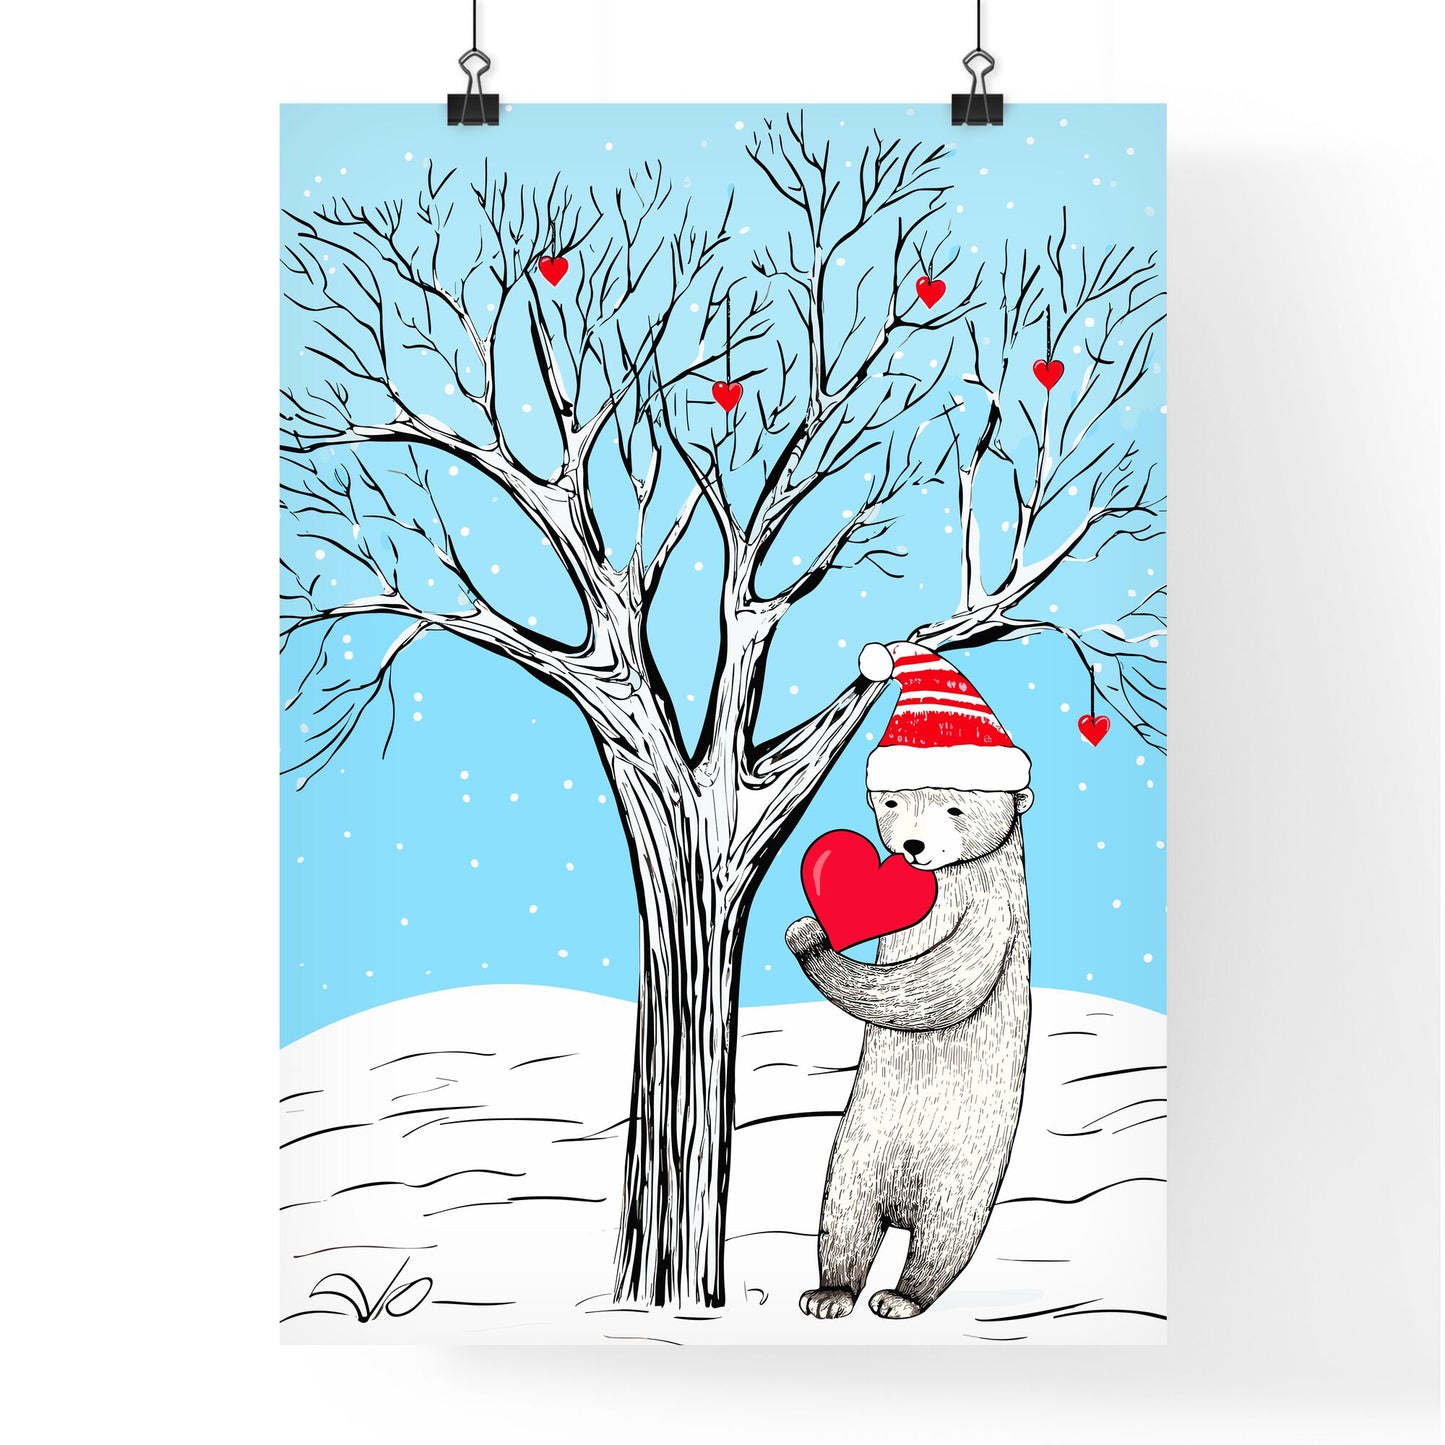 Merry Christmas Card With A Cute Bear Huging A Heart - A Bear Holding A Heart In A Tree Default Title